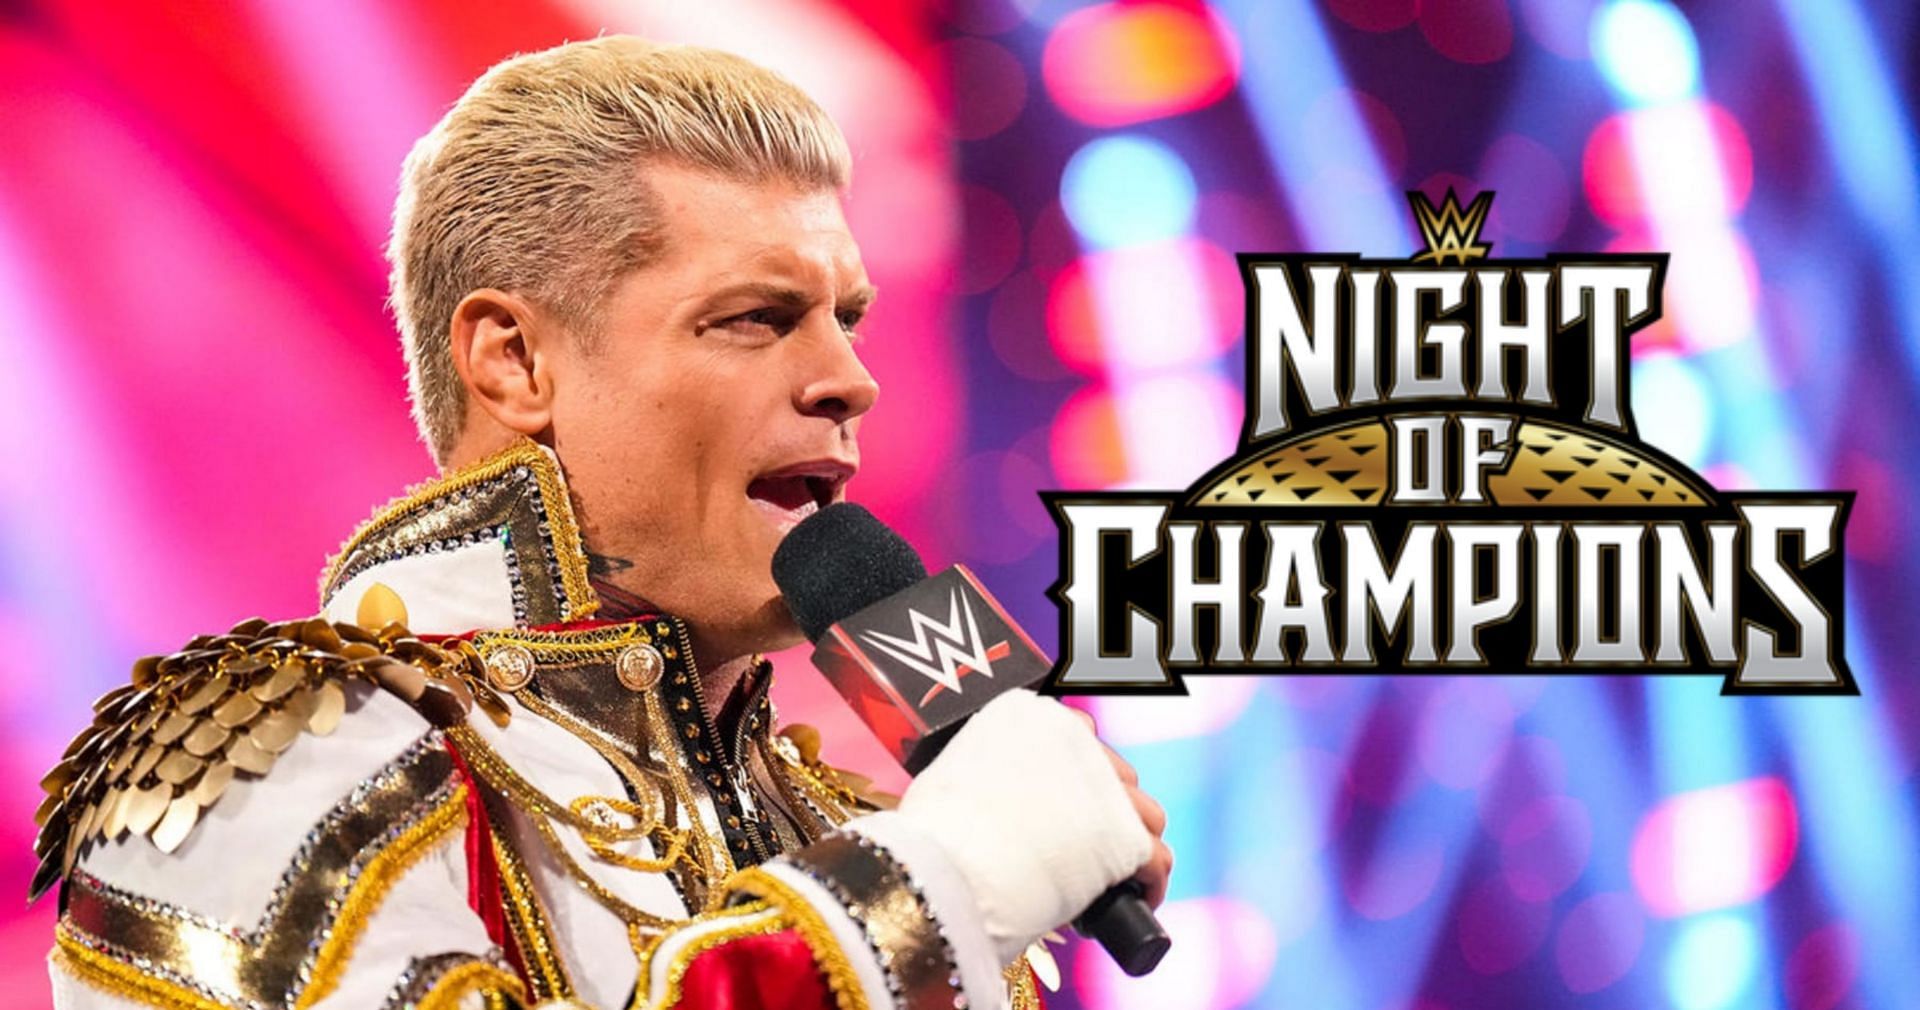 Cody Rhodes is set for a rematch with Brock Lesnar at Night of Champions.